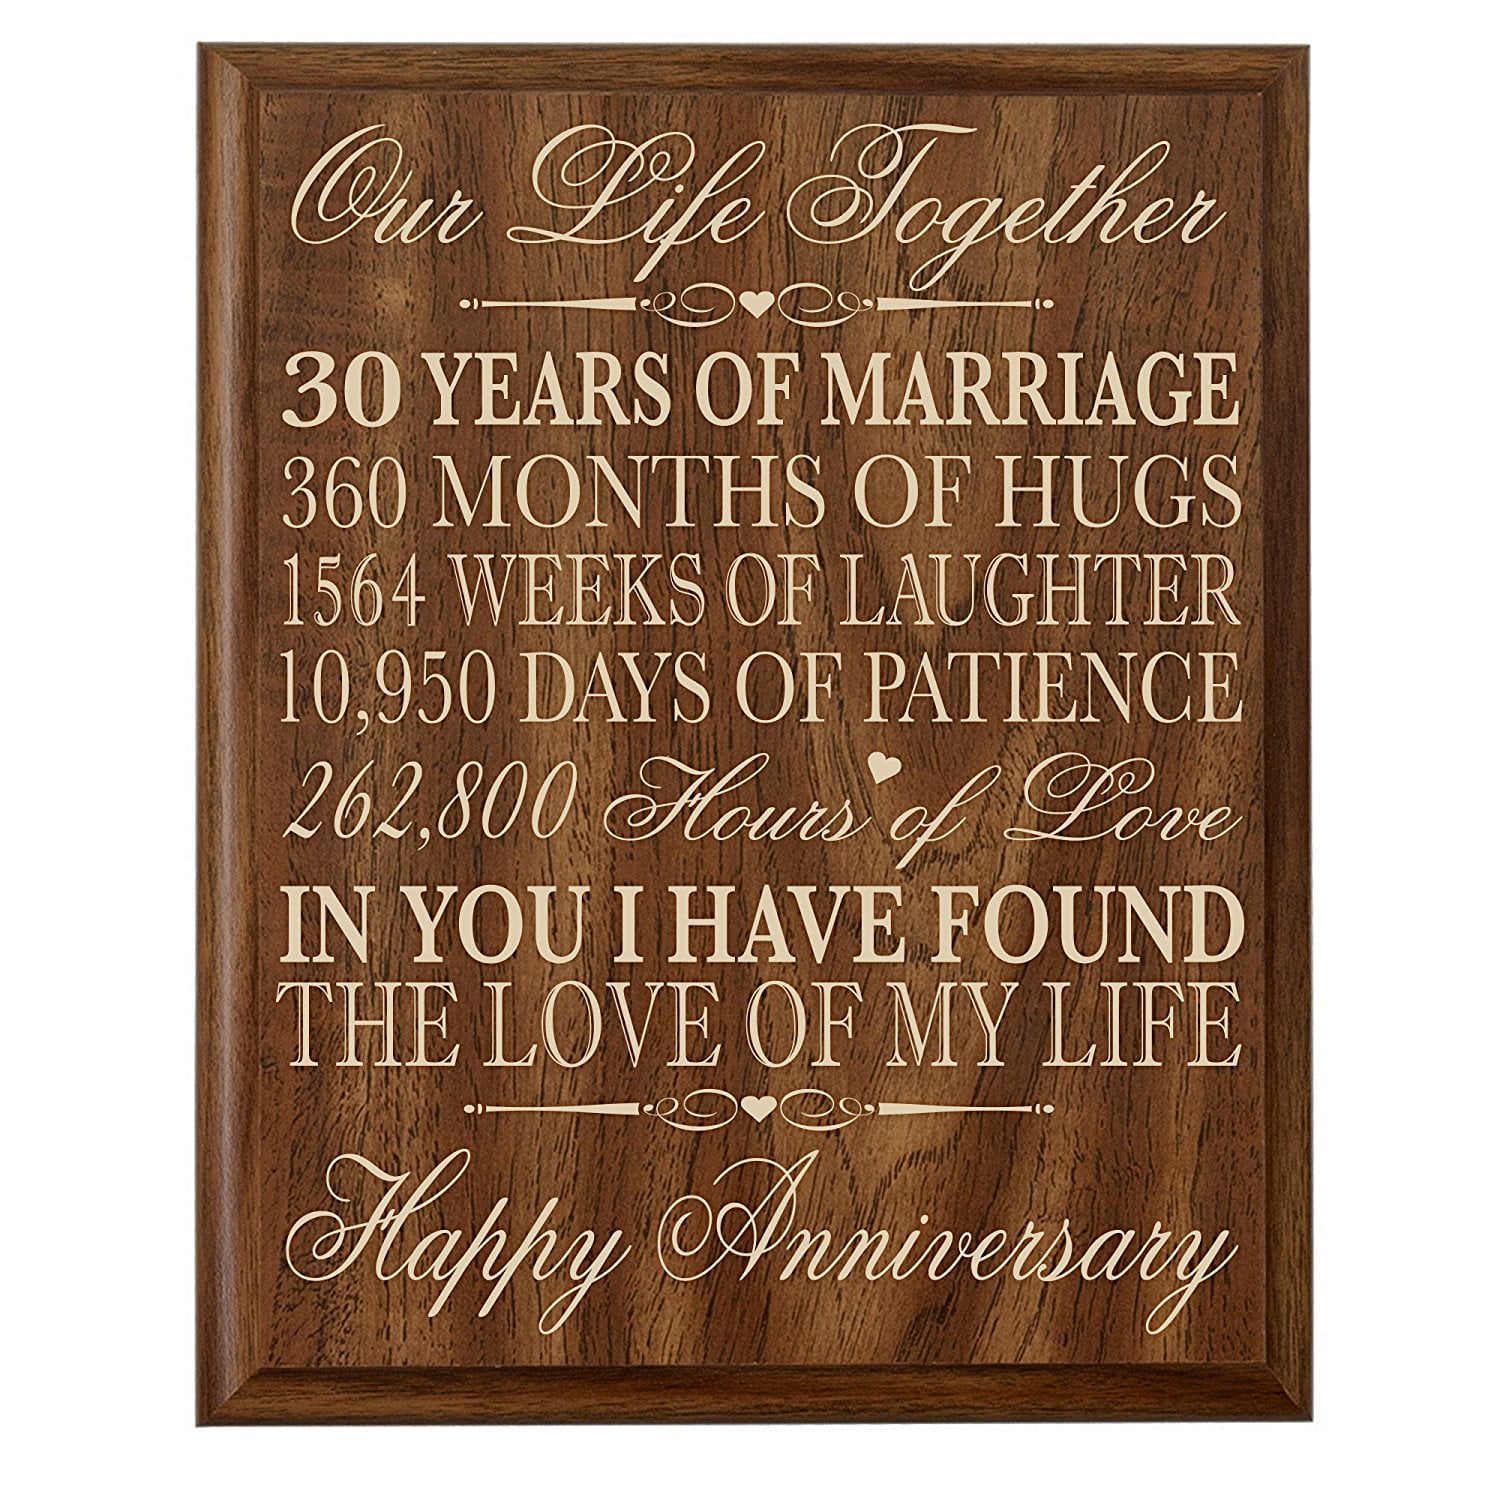 30 Years Wedding Anniversary Gifts
 30th Wedding Anniversary Wall Plaque Our Life To her